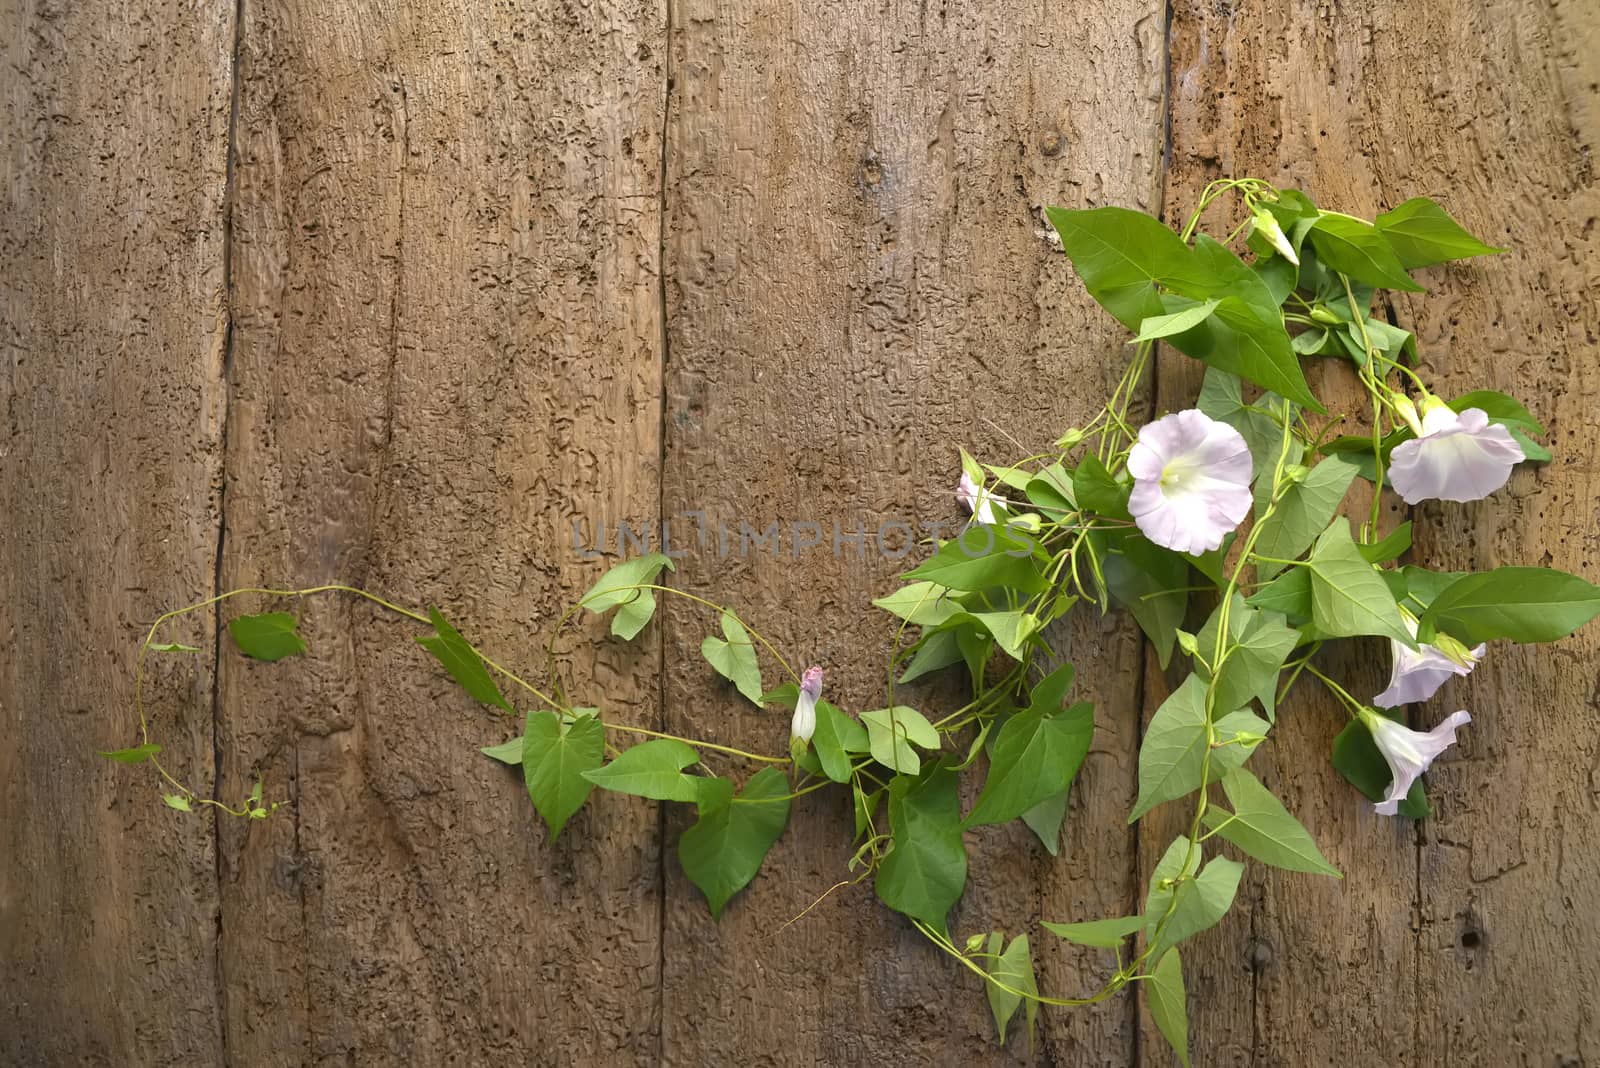 Flowers and wooden wall background by Carche